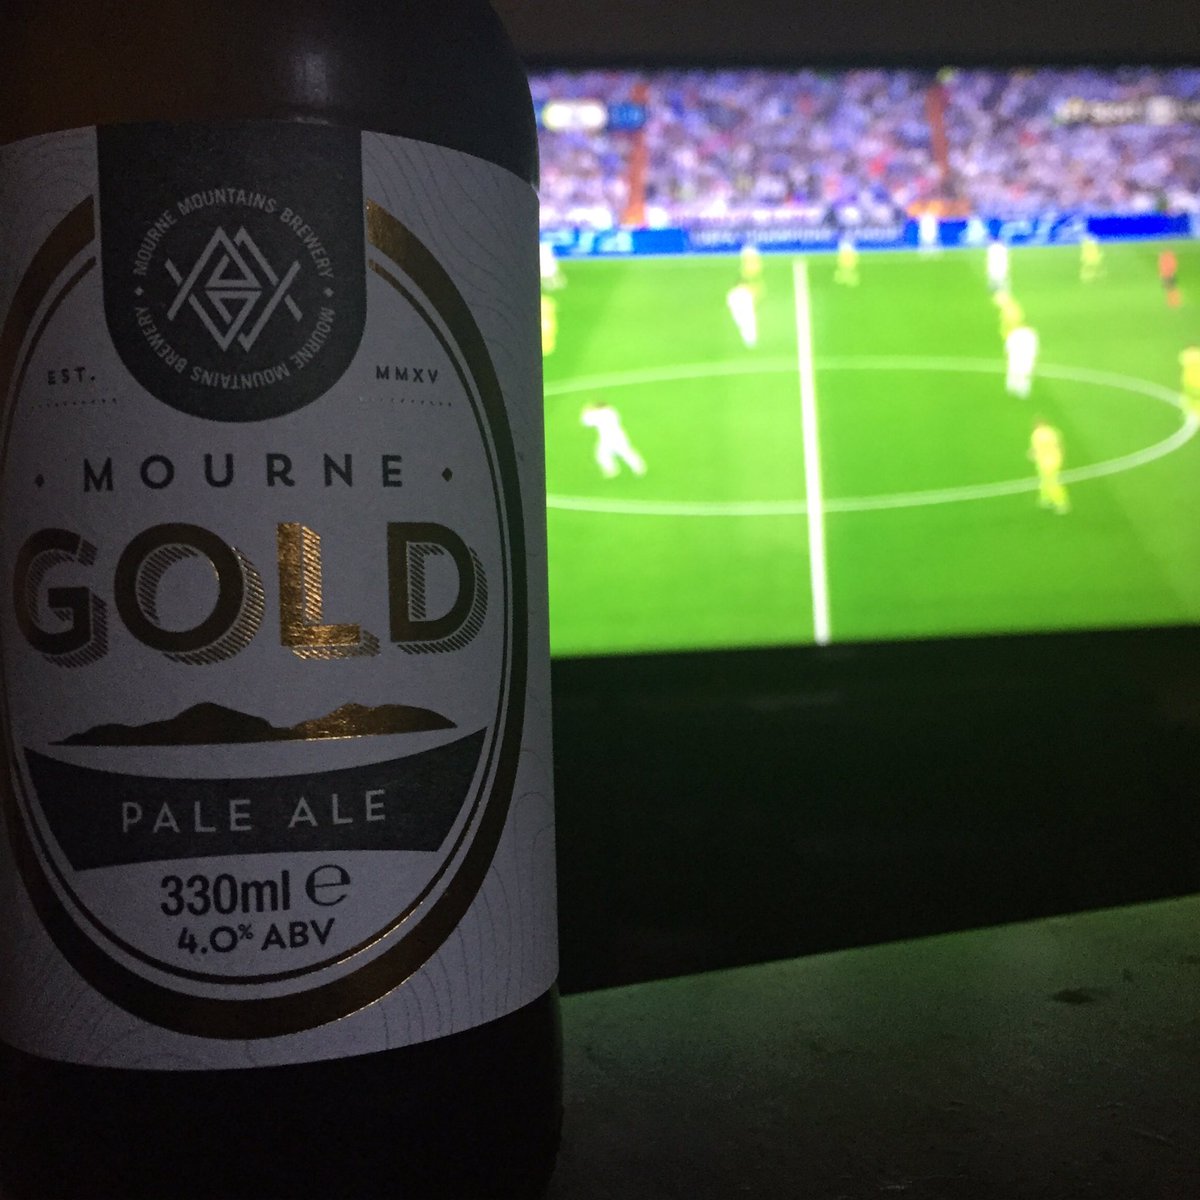 A drink is required to steady the nerves #craftbeer #niproduce #footballandbeer #ucl #cmoncity